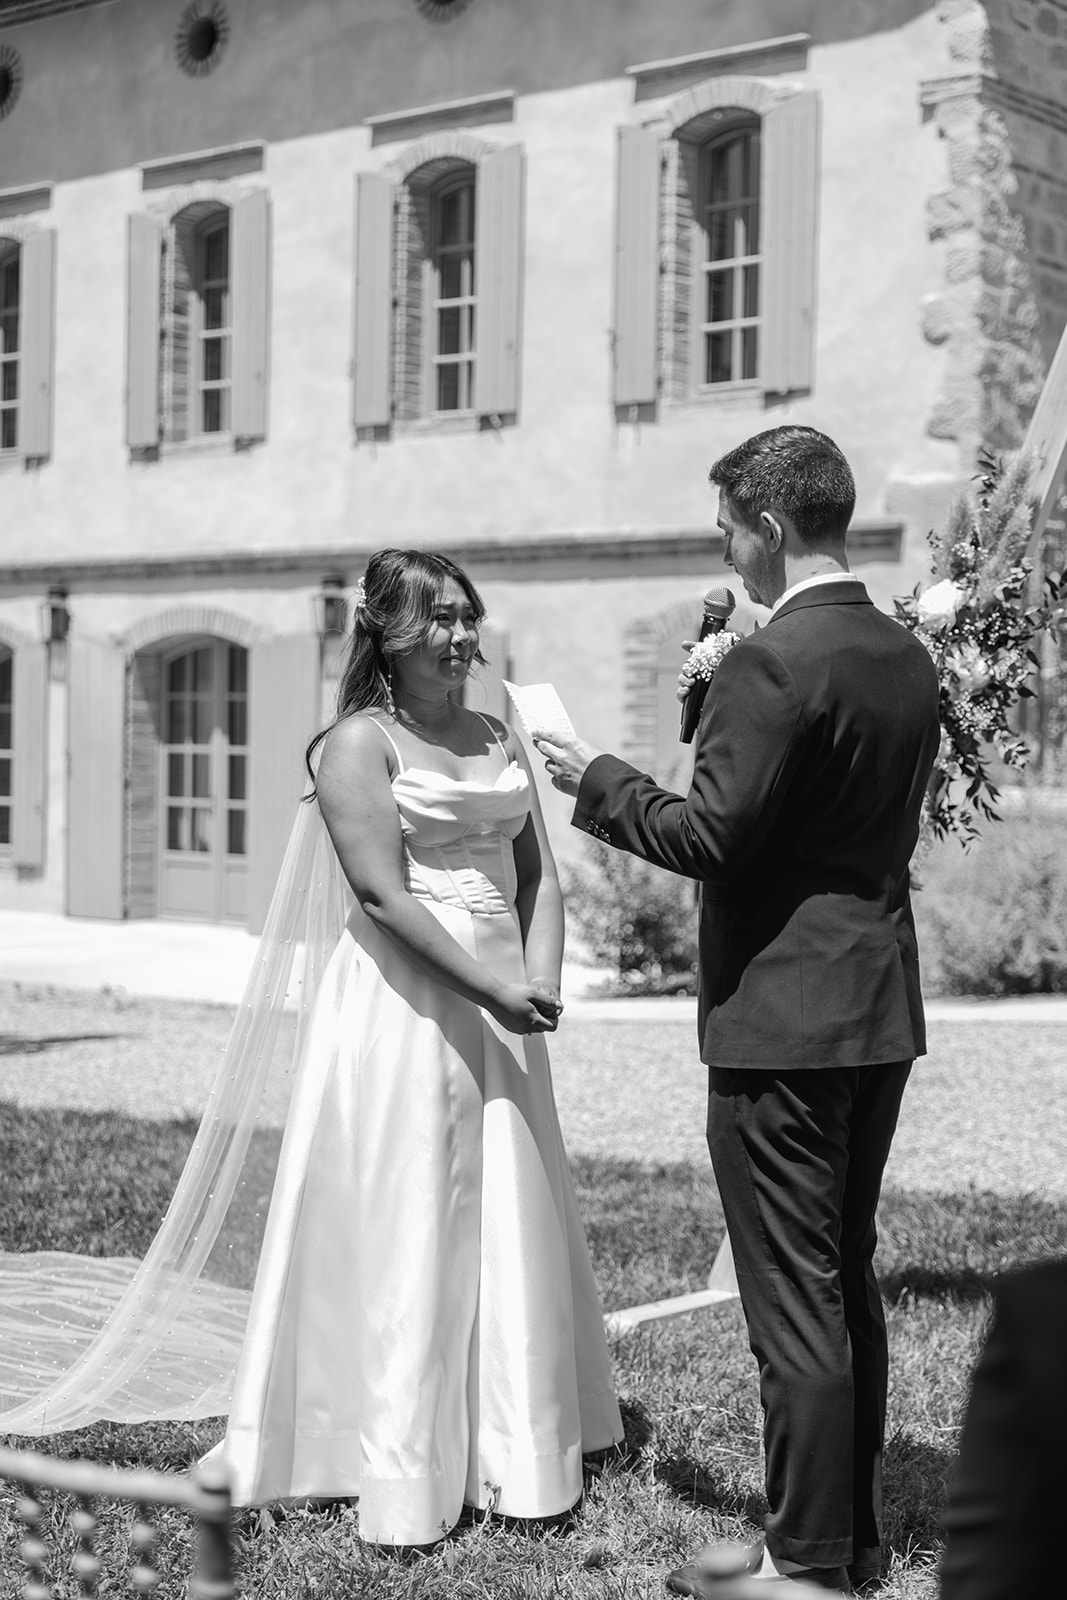 Bride and Groom at a France Destination Wedding. Photography and Videography by Olive Joy Photography